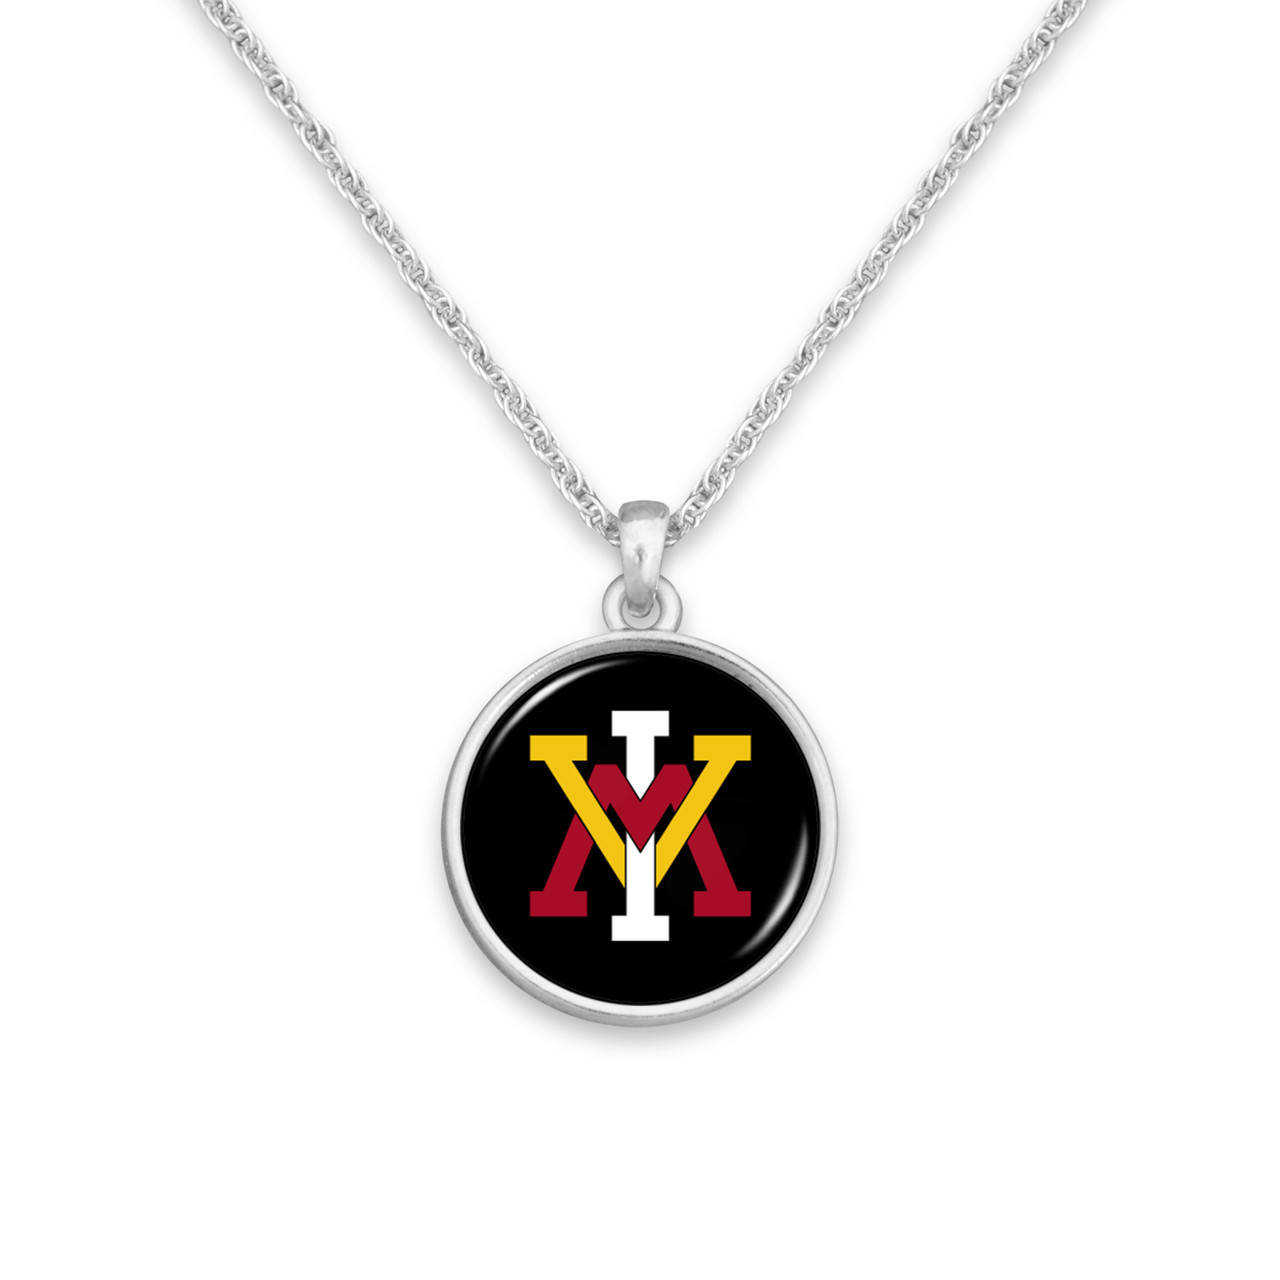 Virginia Military Keydets Necklace- Leah